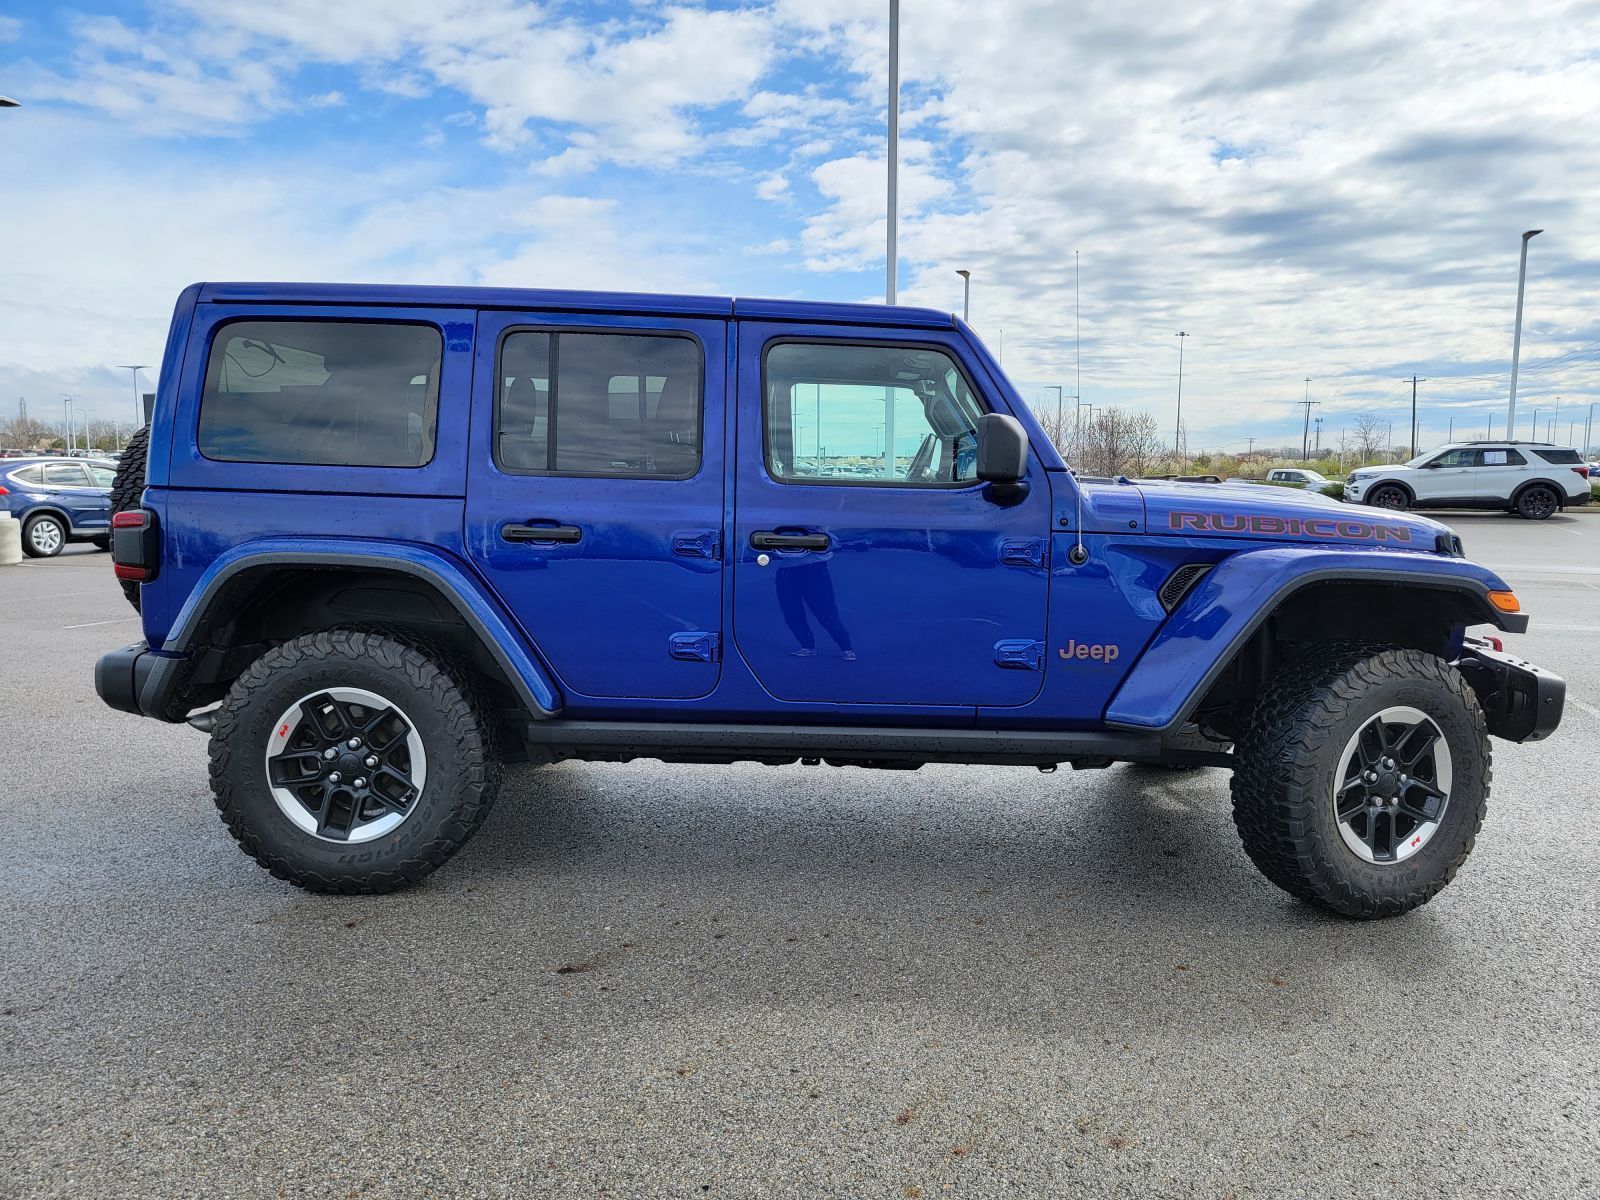 Used, 2019 Jeep Wrangler Unlimited Unlimited Rubicon, Blue, P0529-10